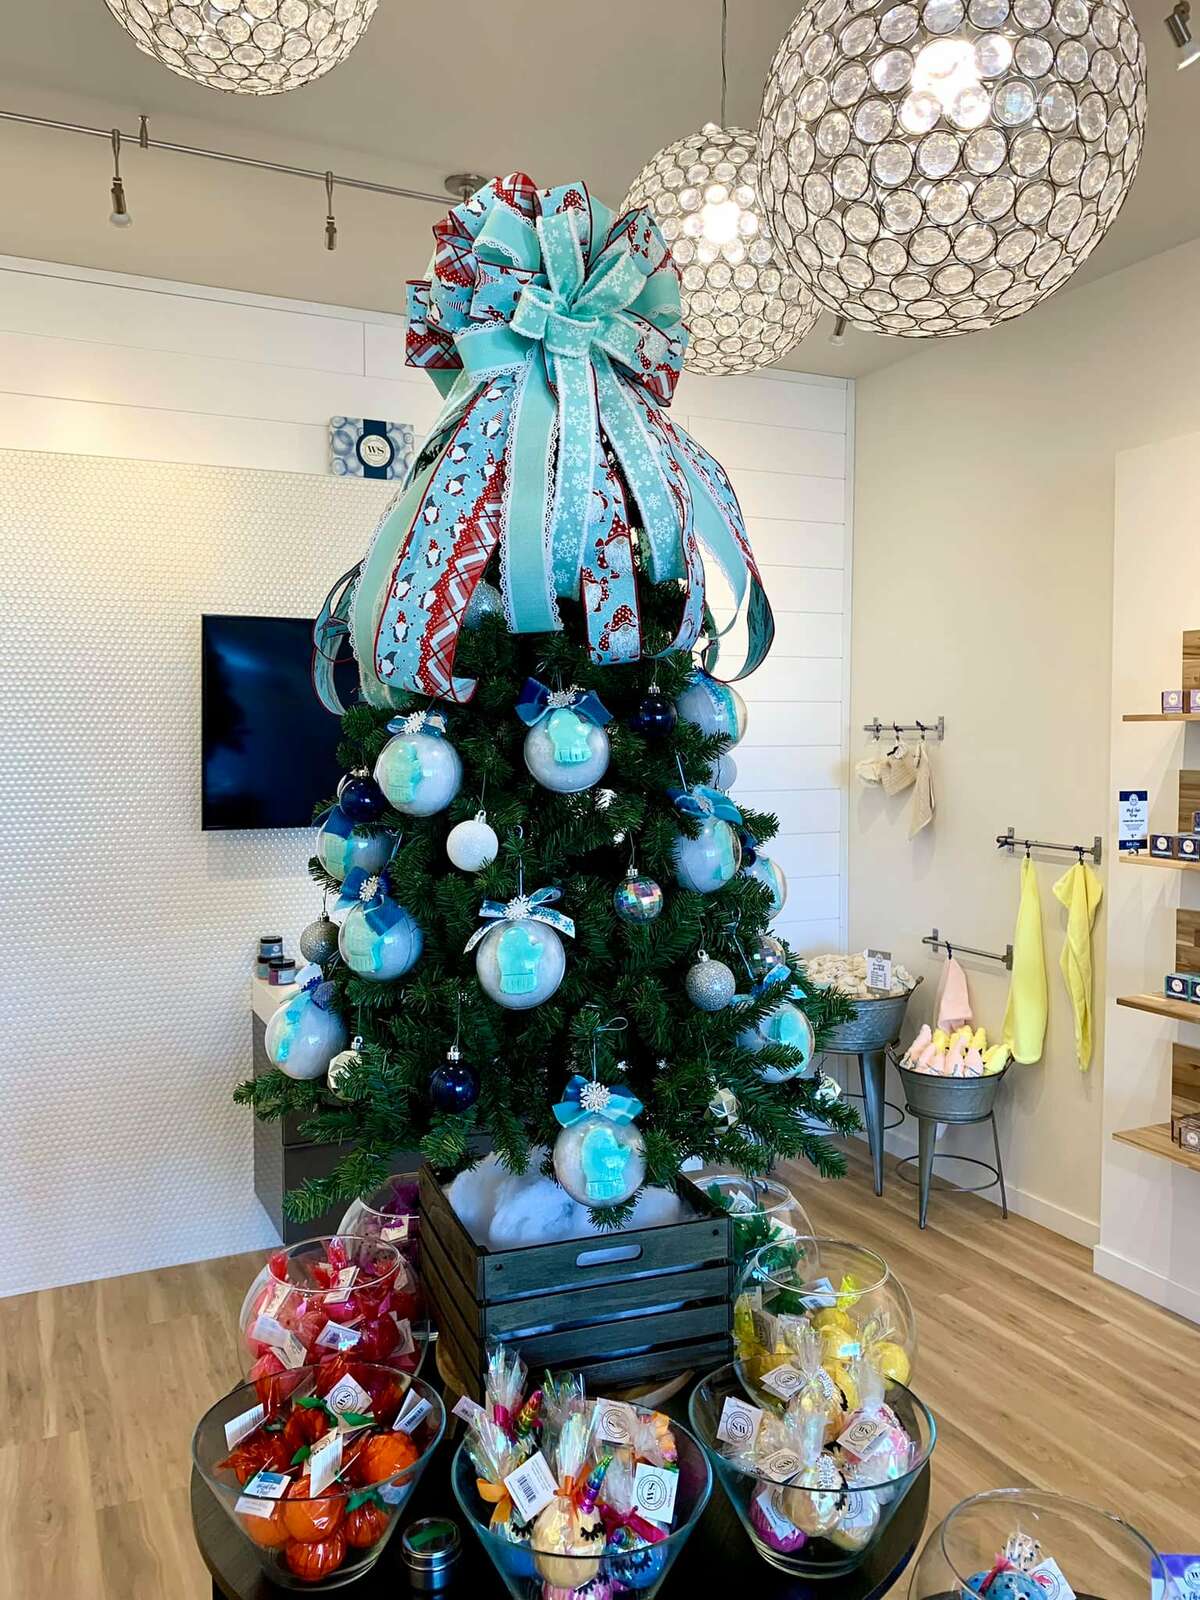 Water Sweets Soap Company is selling ornaments filled with bubble bath for the holidays. 